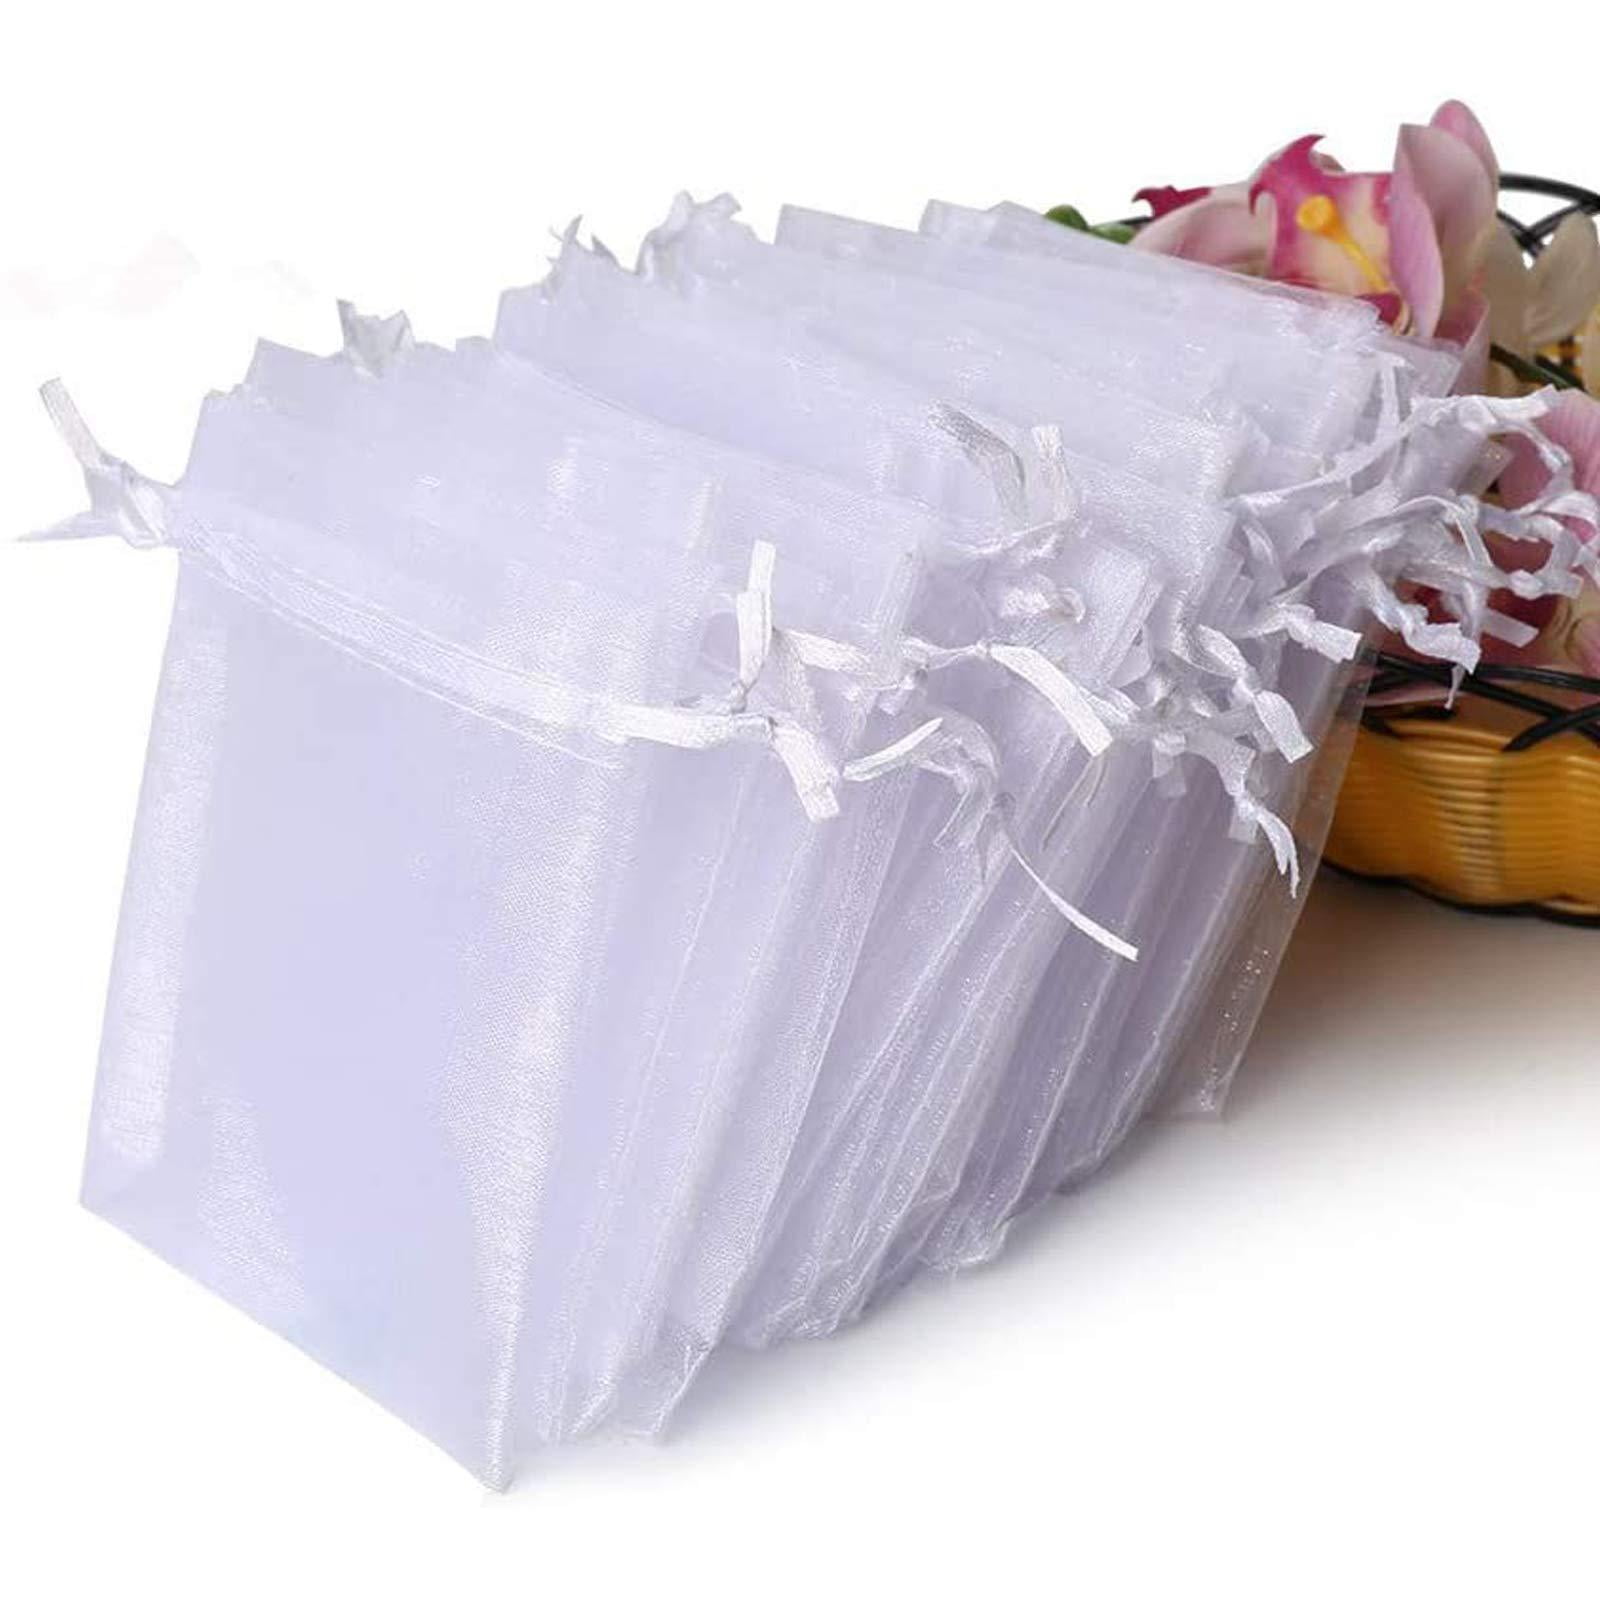 72 PCS 3x4 HI QUALITY Sheer Organza Bag Pouch Wedding/Party Favors Jewelry